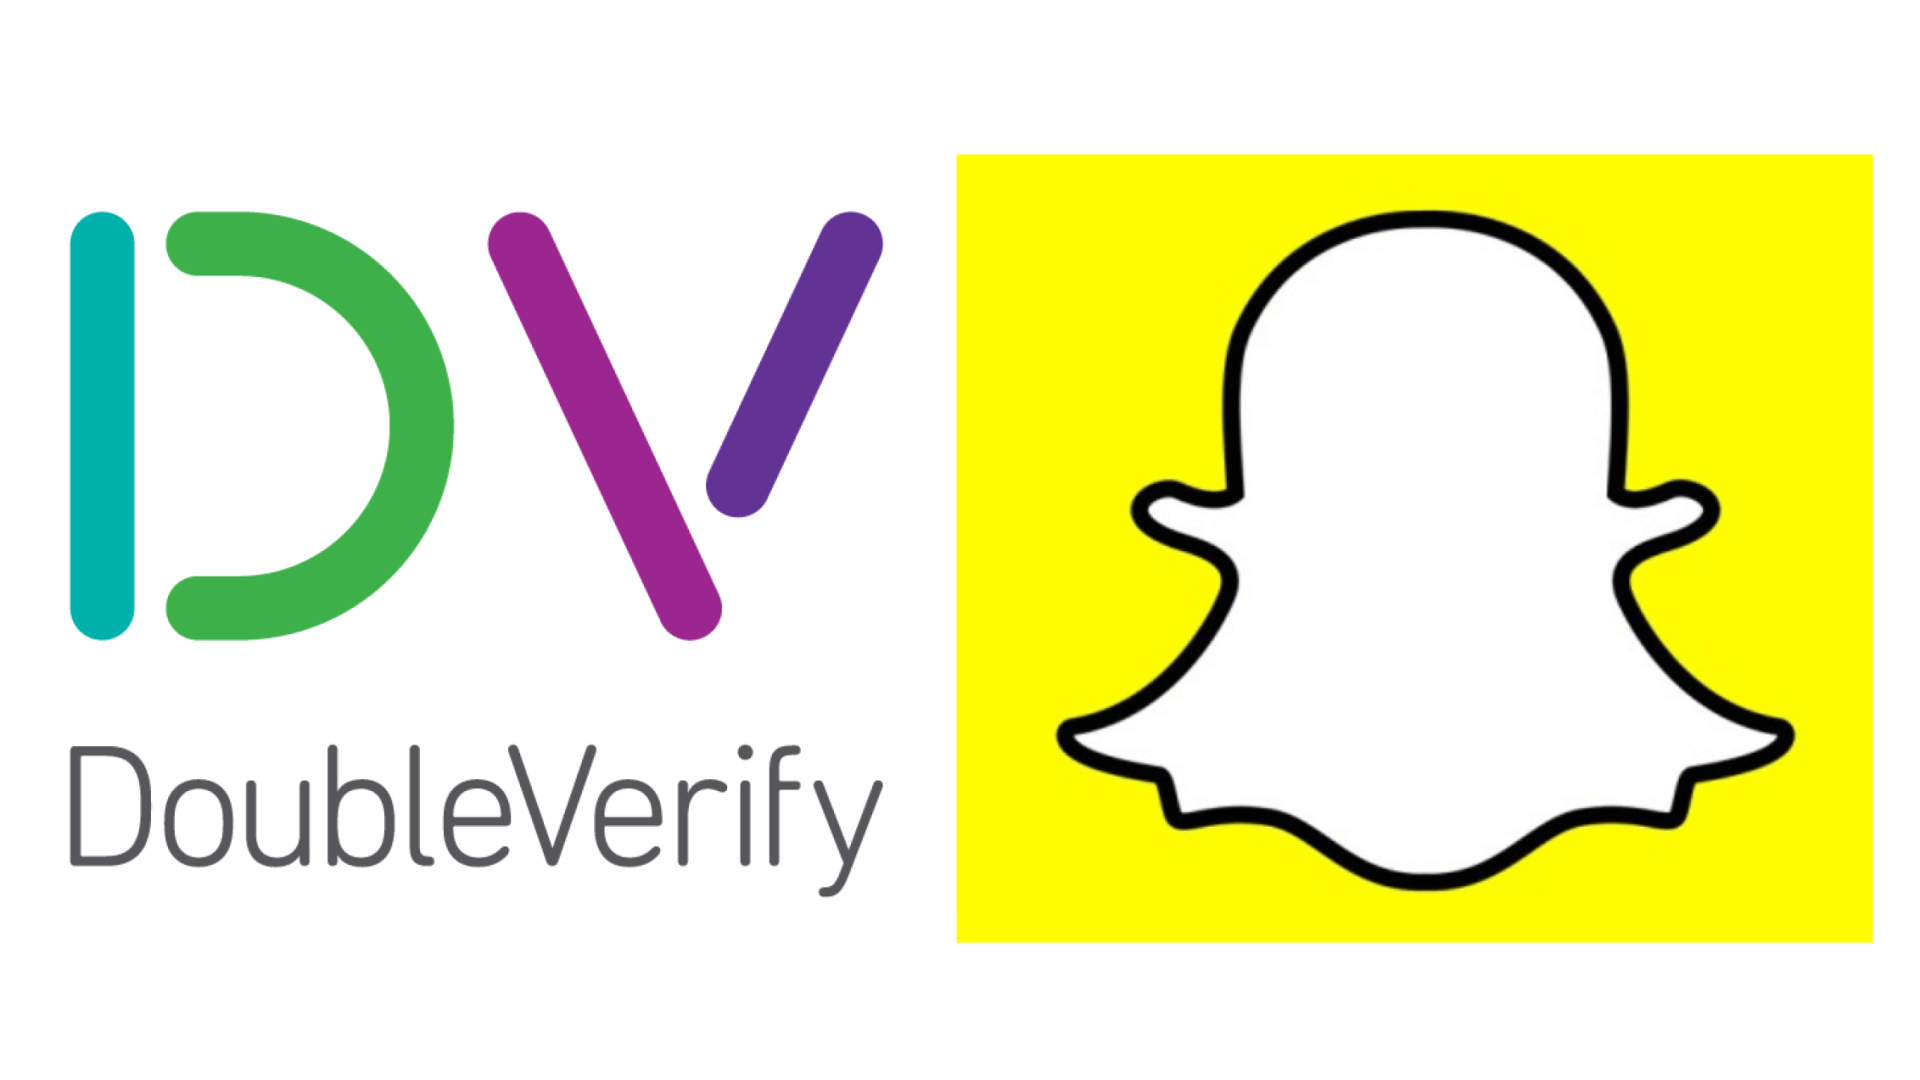 Snapchat adds DoubleVerify as brand safety, viewability measurement partner